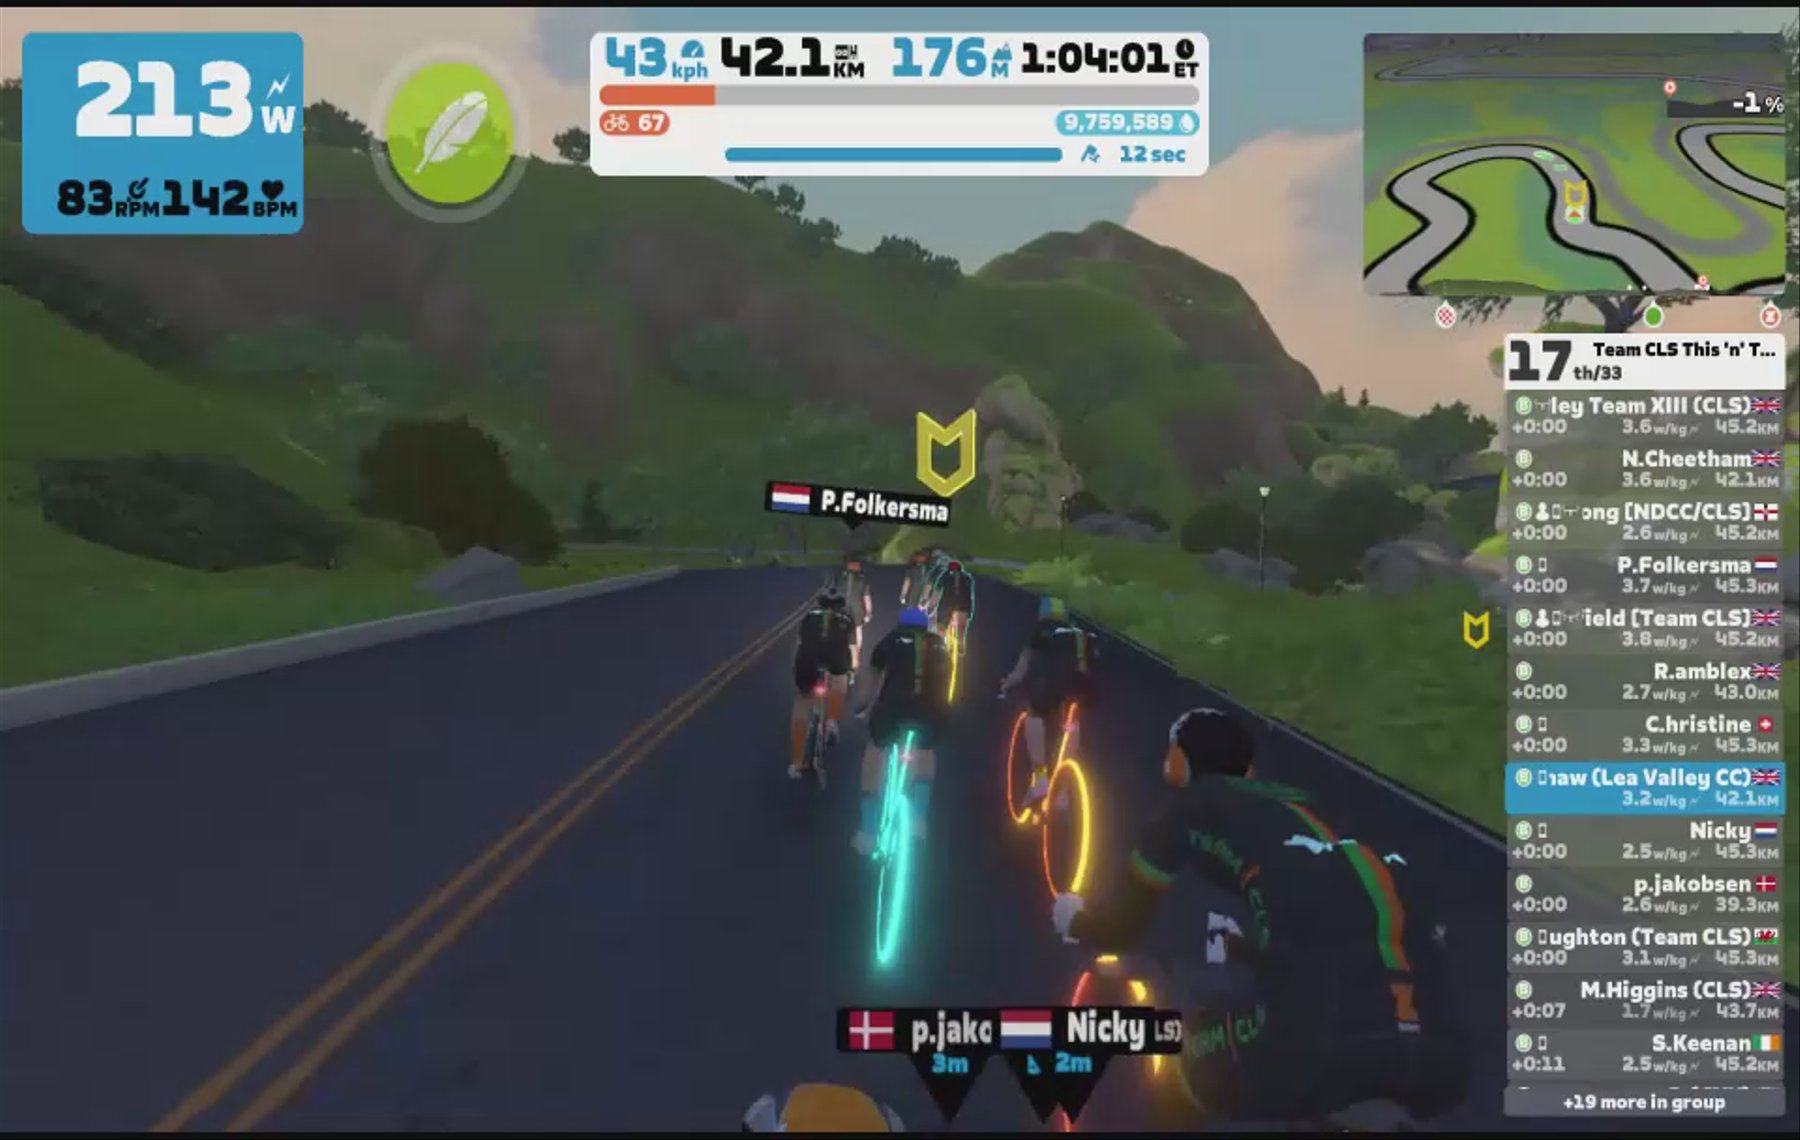 Zwift - Group Ride: Team CLS This 'n' That (B) on Spiral into the Volcano in Watopia